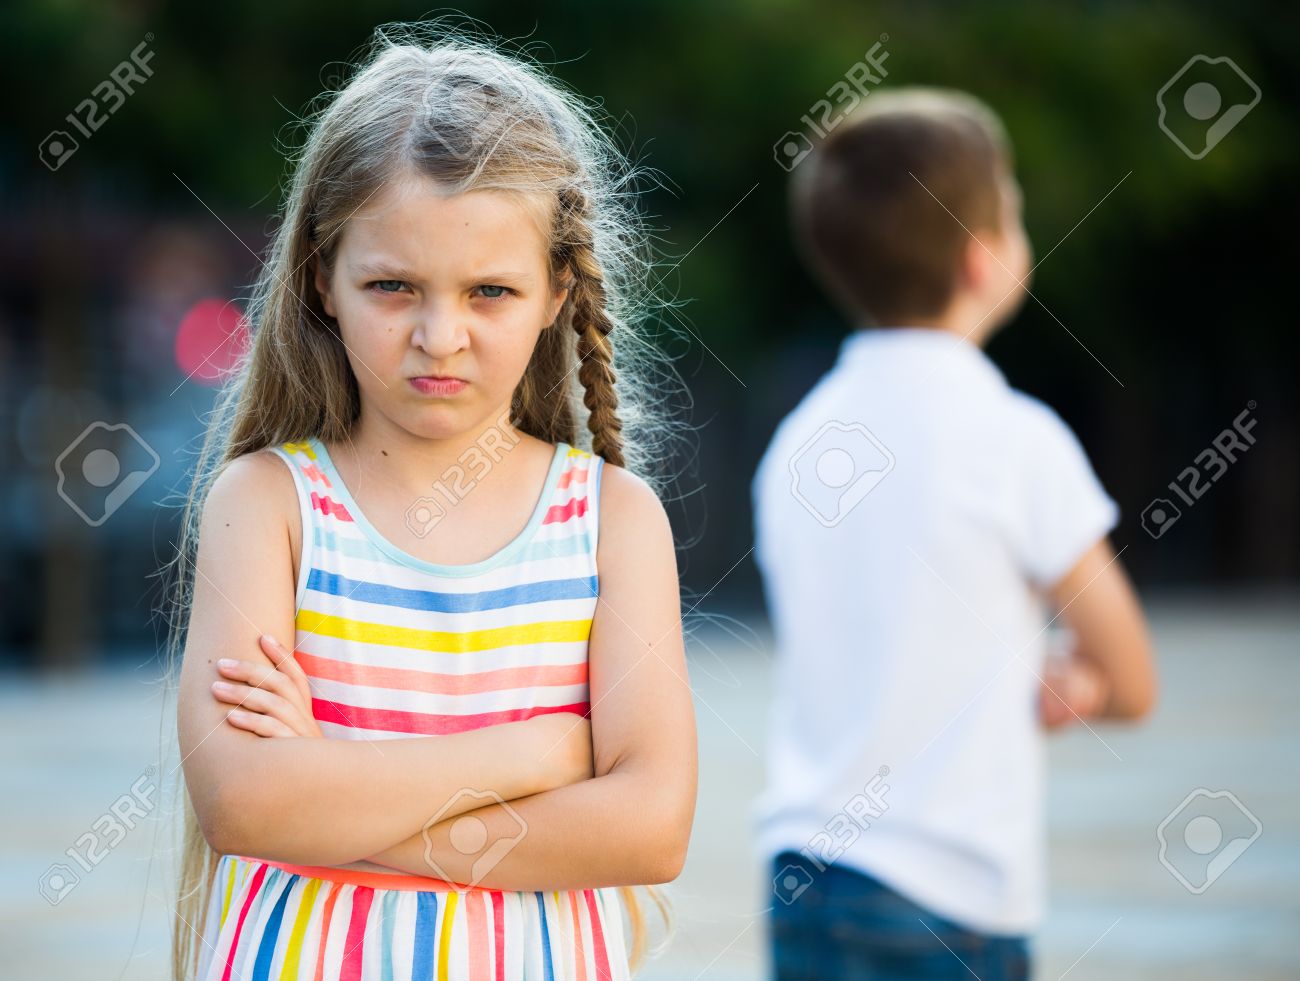 85347398-portrait-of-angry-girl-in-elementary-school-age-not-playing-with-friend-in-park-outdoors.jpg